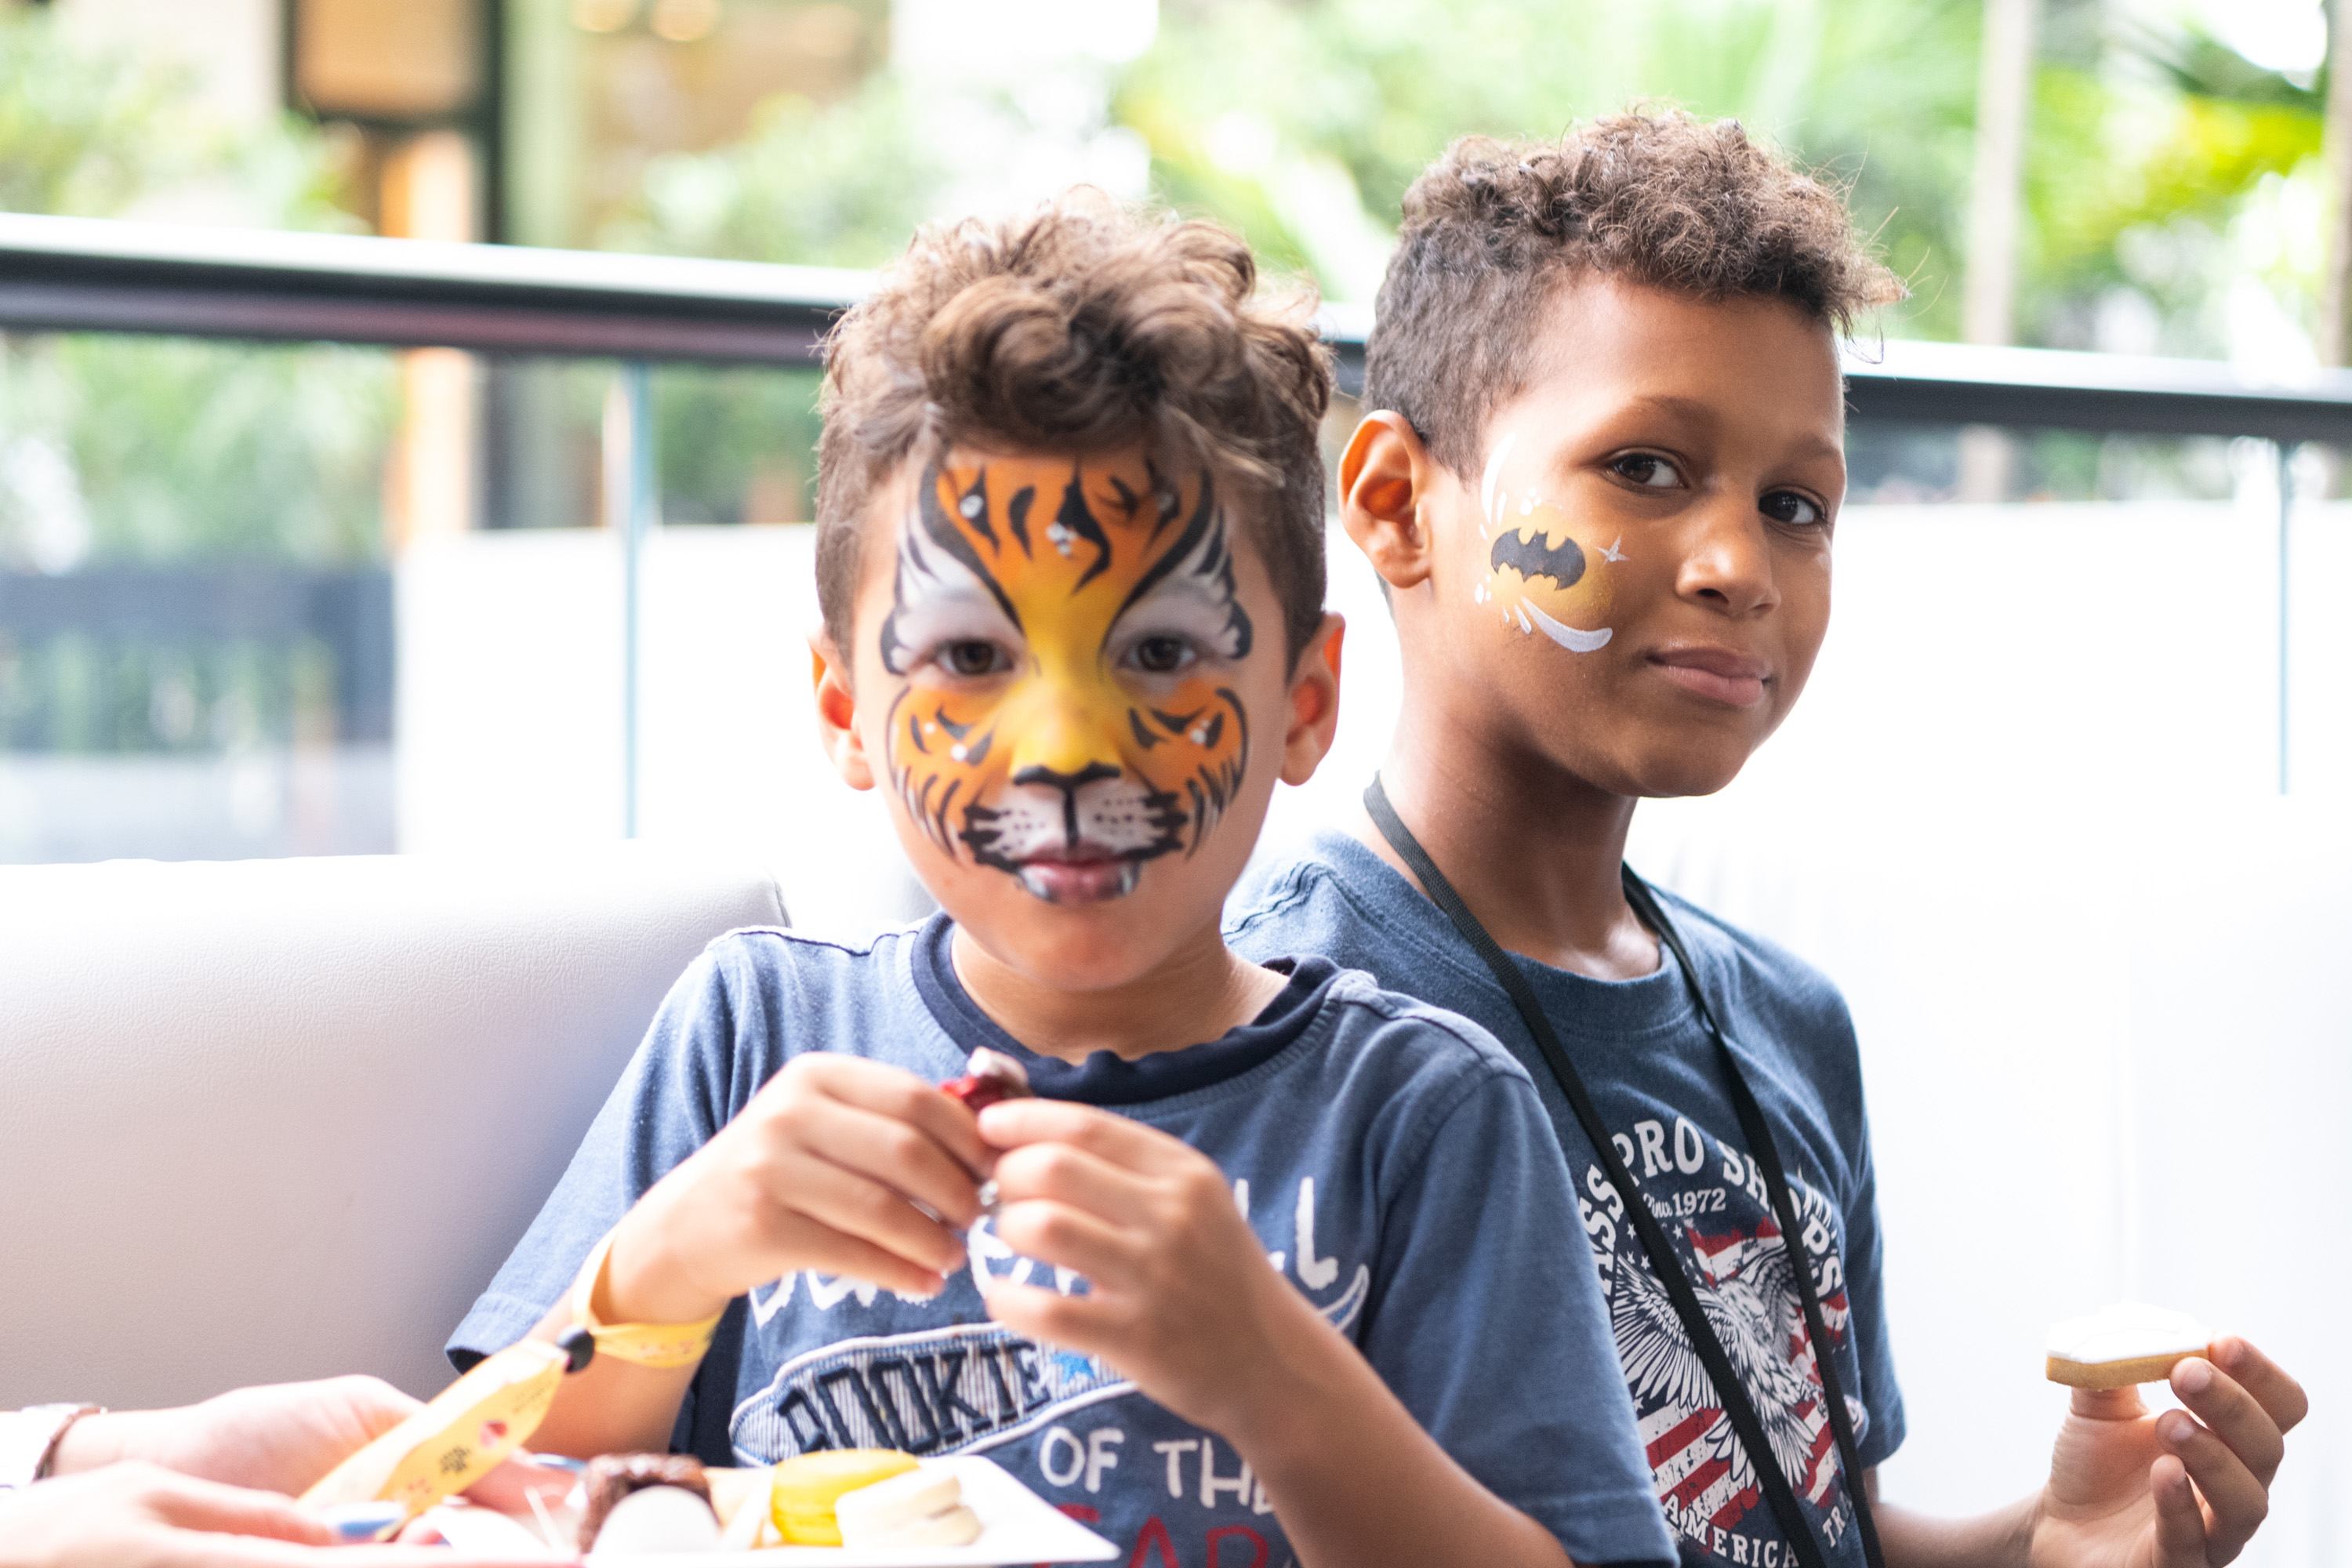 A variety of images showcasing the fourth annual “Ice Cream We Love” event. Images include guests in attendance, ice cream treats and setup, and activities featured at the event including games, face painting, and performances.